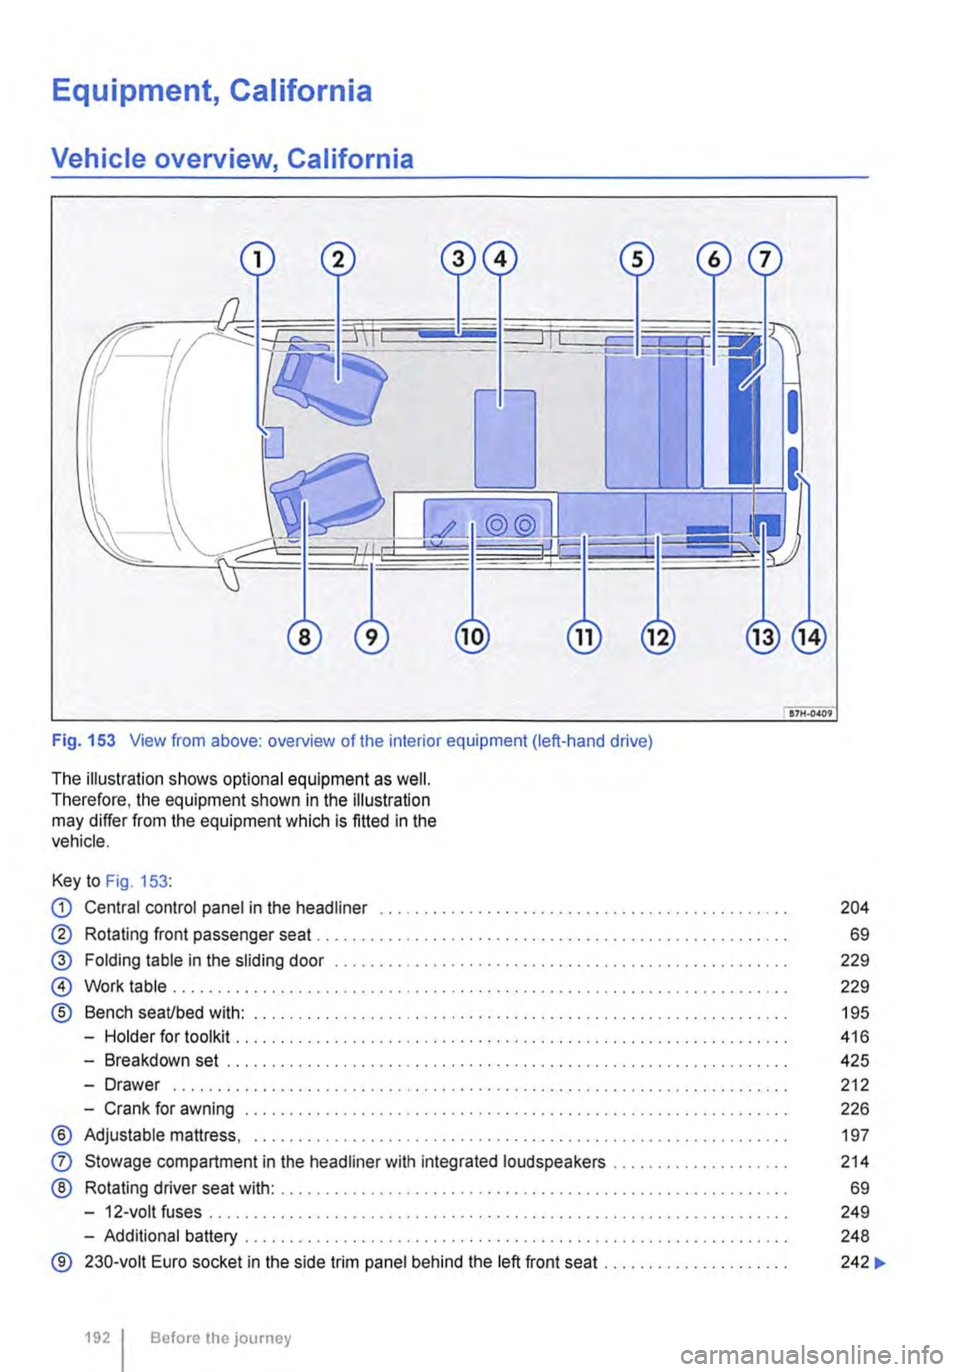 VOLKSWAGEN TRANSPORTER 2015  Owner´s Manual Equipment, California 
Vehicle overview, California 
 
Fig. 153 View from above: overview of the interior equipment (left-hand drive) 
The illustration shows optional equipment as well. Therefore, the